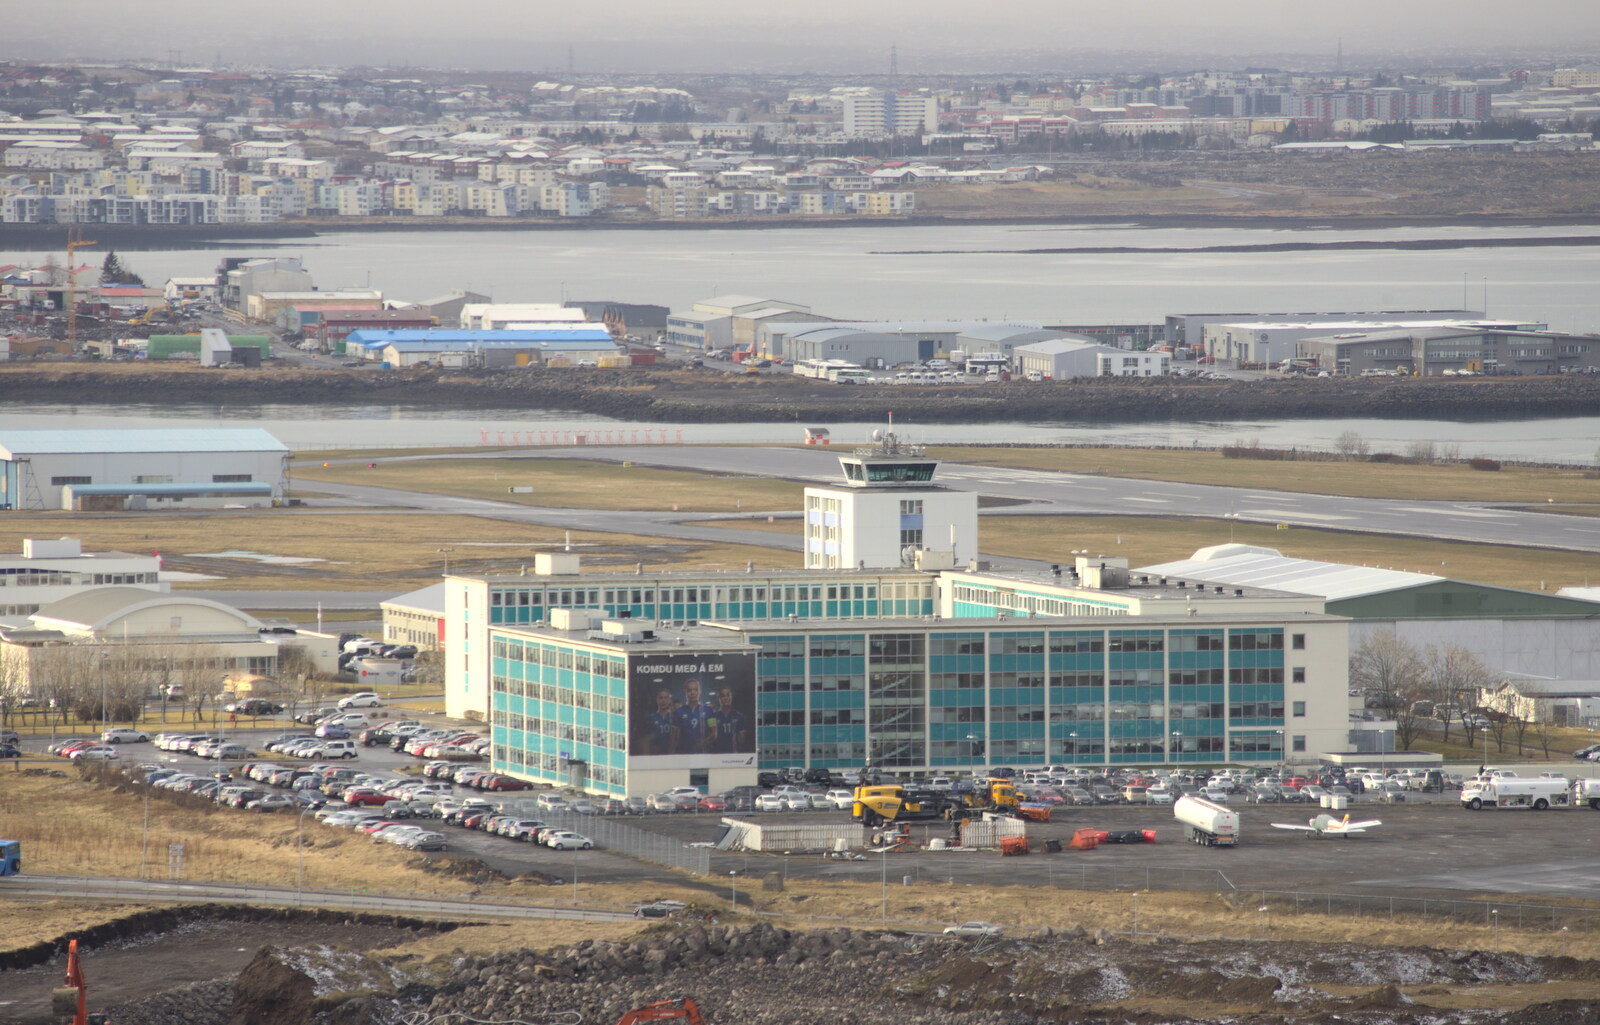 The hotel and the airport from Hallgrímskirkja Cathedral and Whale Watching, Reykjavik - 21st April 2017